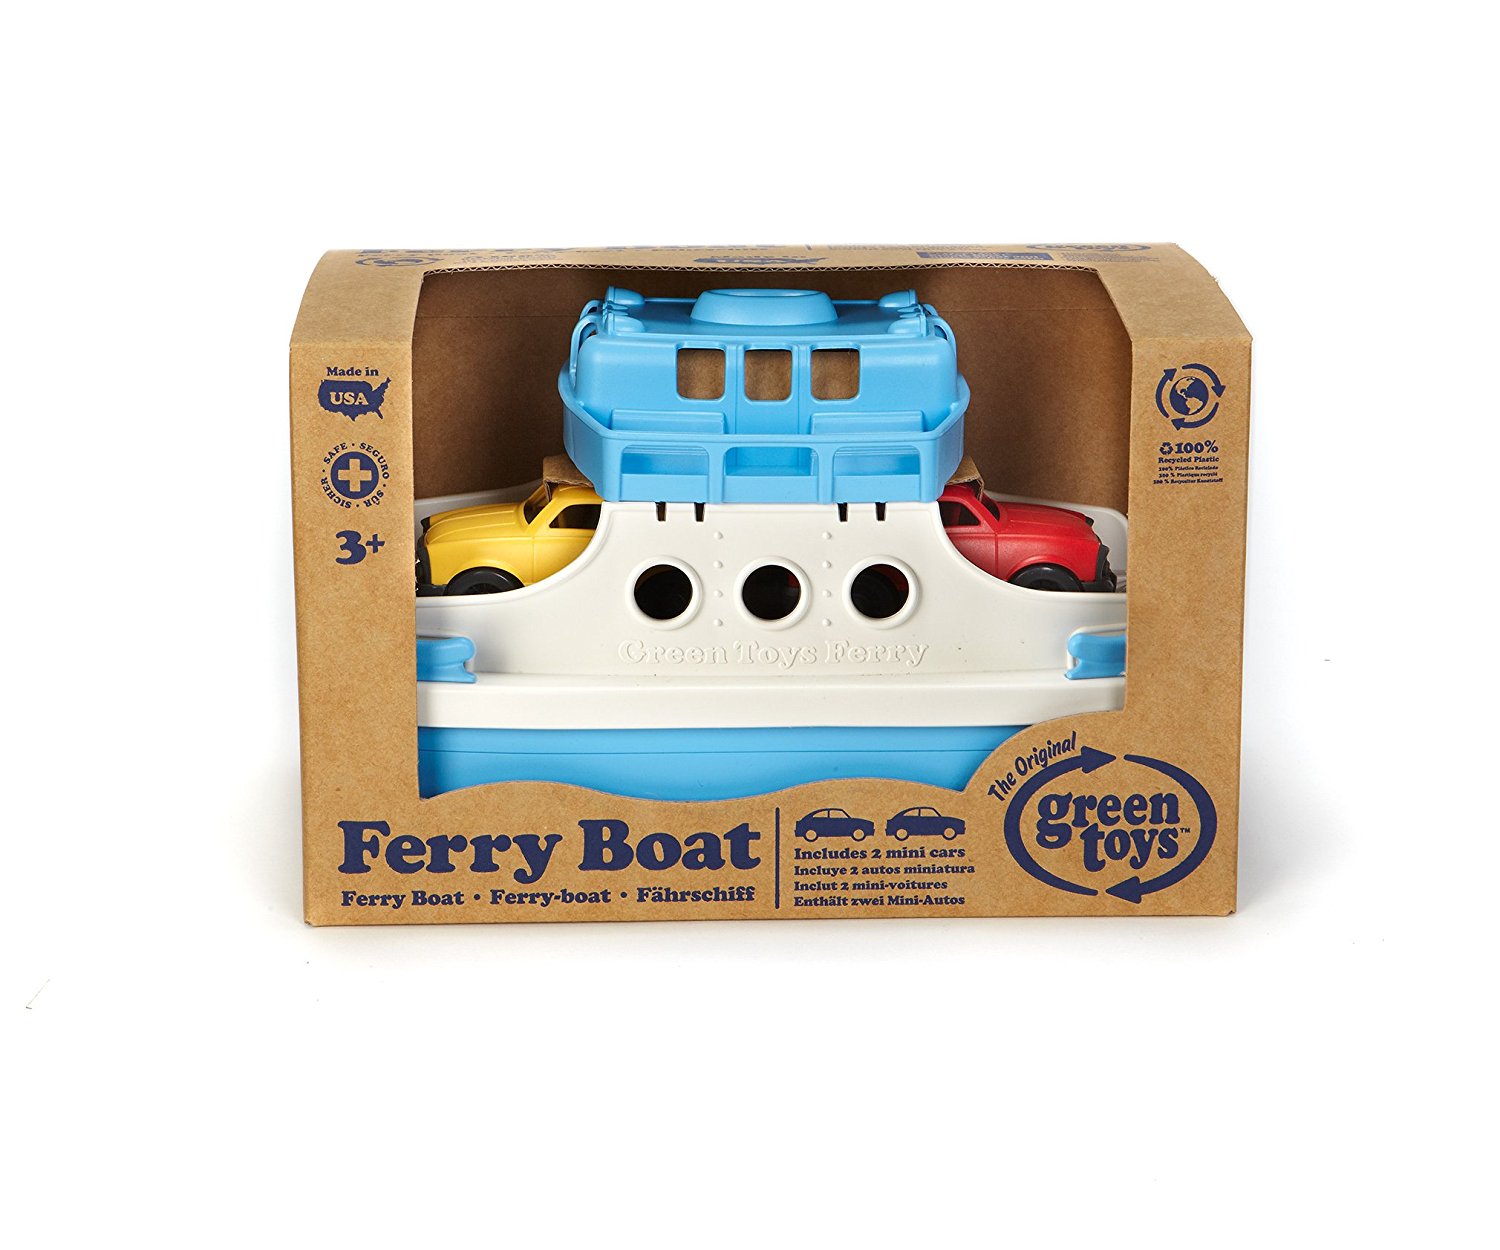 Green Toys Ferry Boat No BPA Motor Skills Dishwasher Safe Made in USA. phthalates Pretend Play Recycled Plastic Kids Bath Toy Floating Vehicle PVC Blue/White CB 